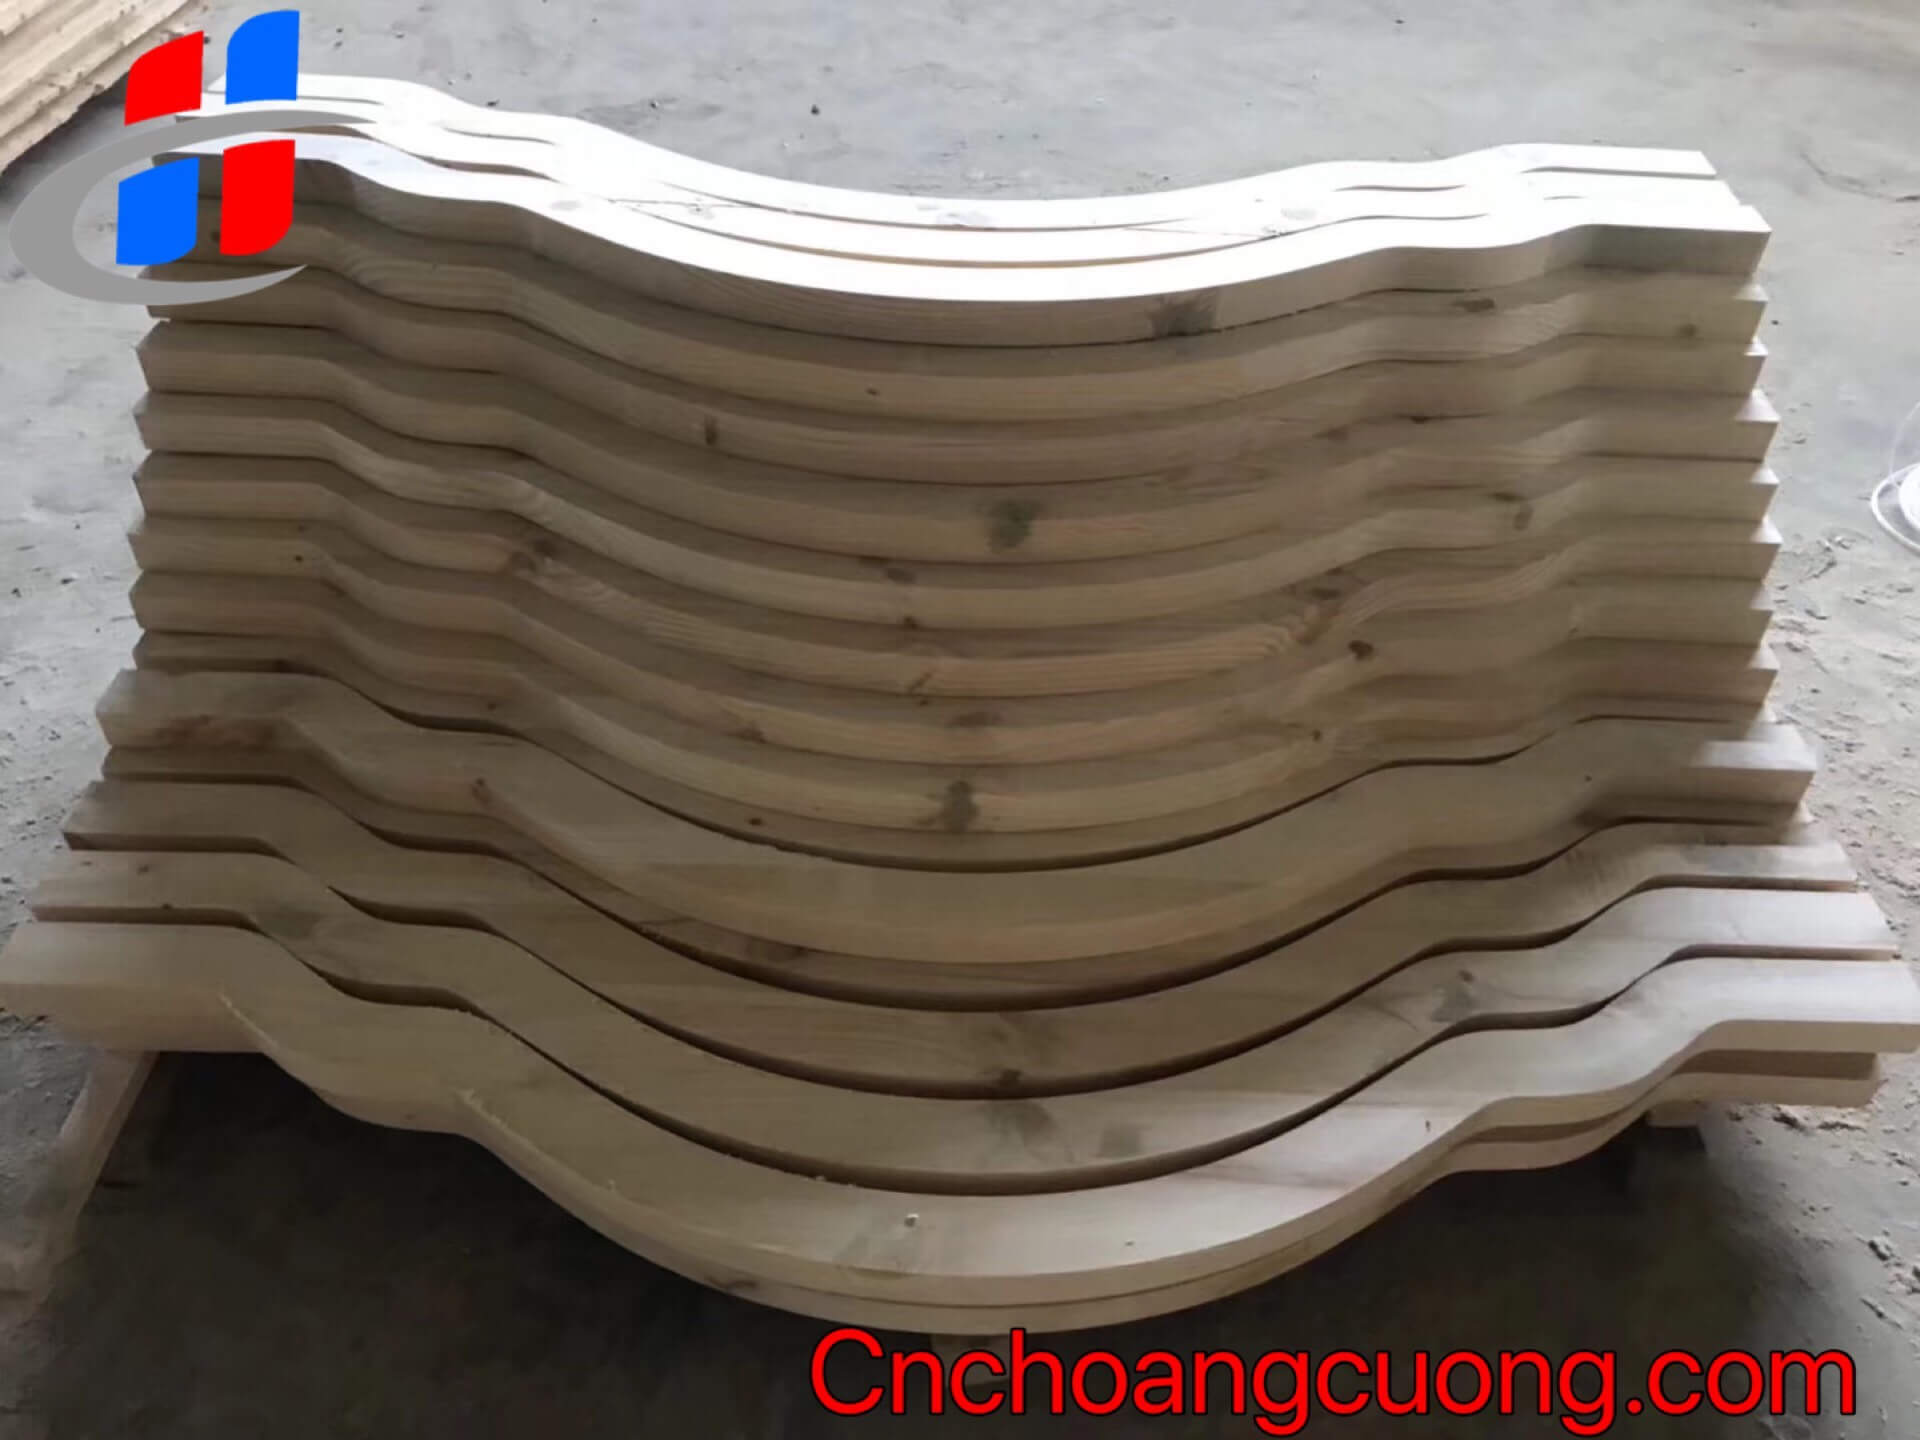 https://cnchoangcuong.com/?post_type=product&p=1511&preview=true